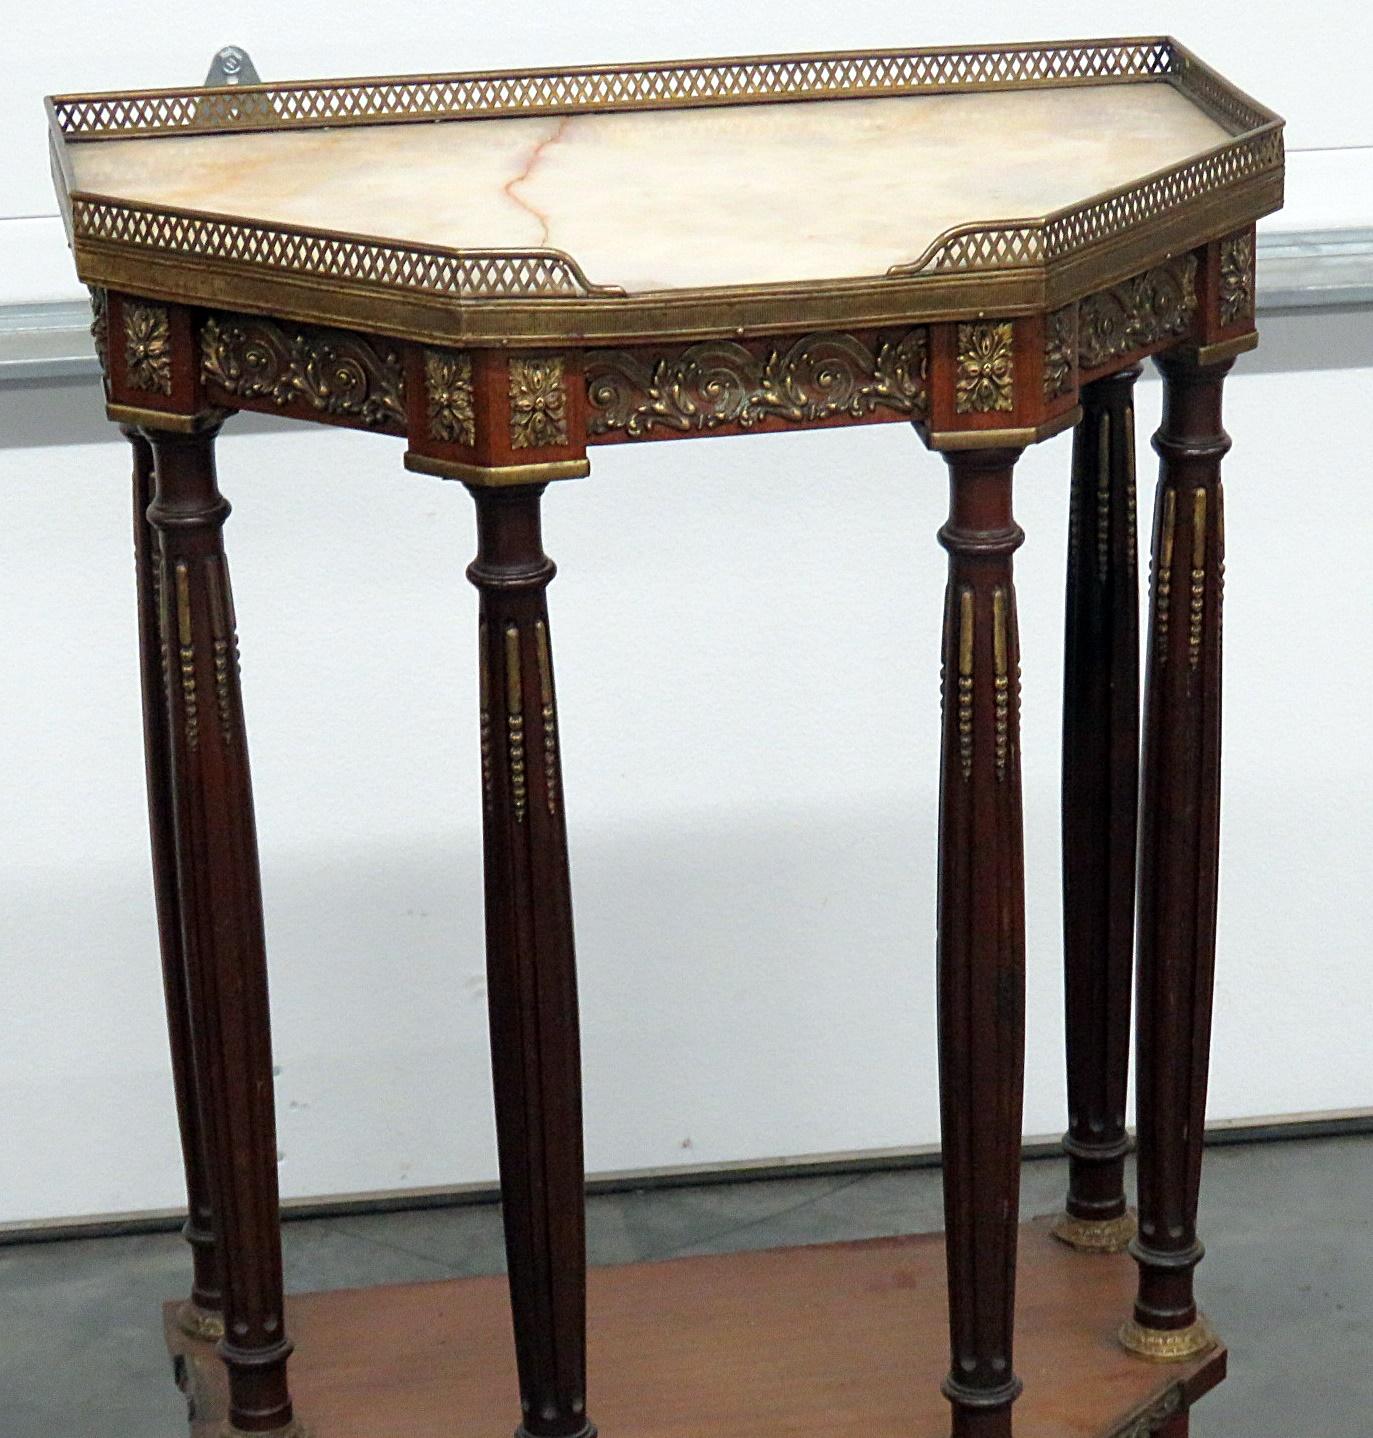 Regency style marble-top hall table with bronze gallery and accents.